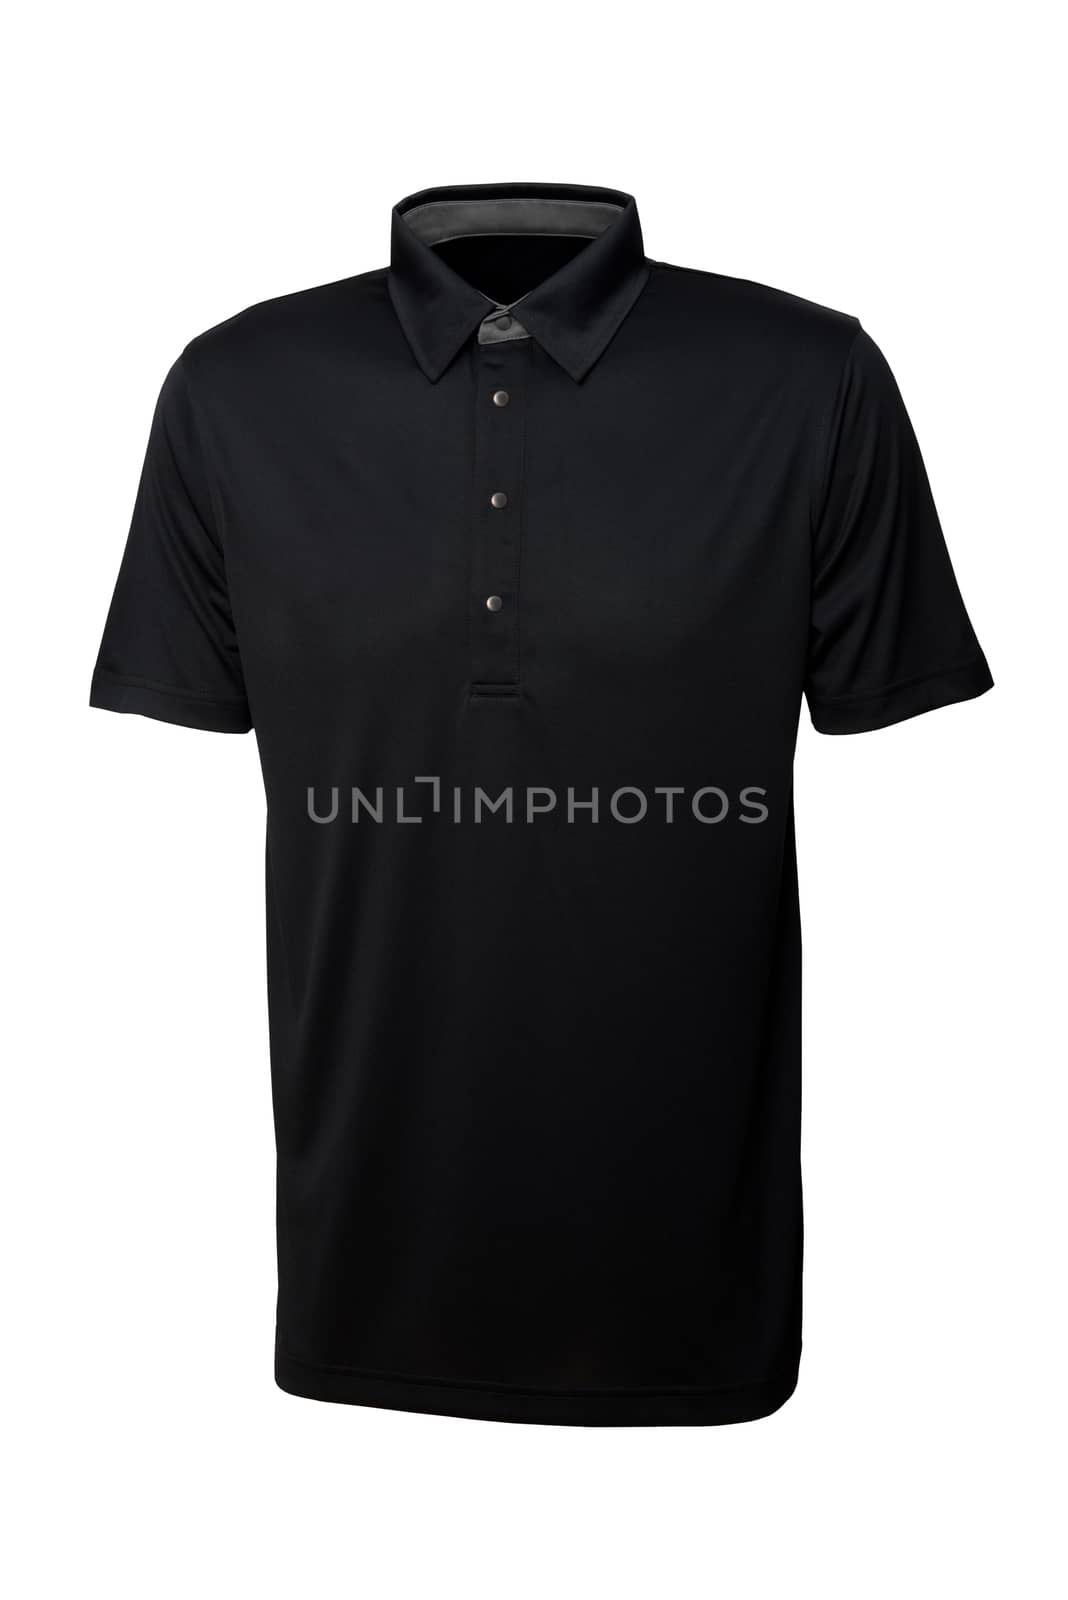 Black tee shirt for man or woman isolated by praethip